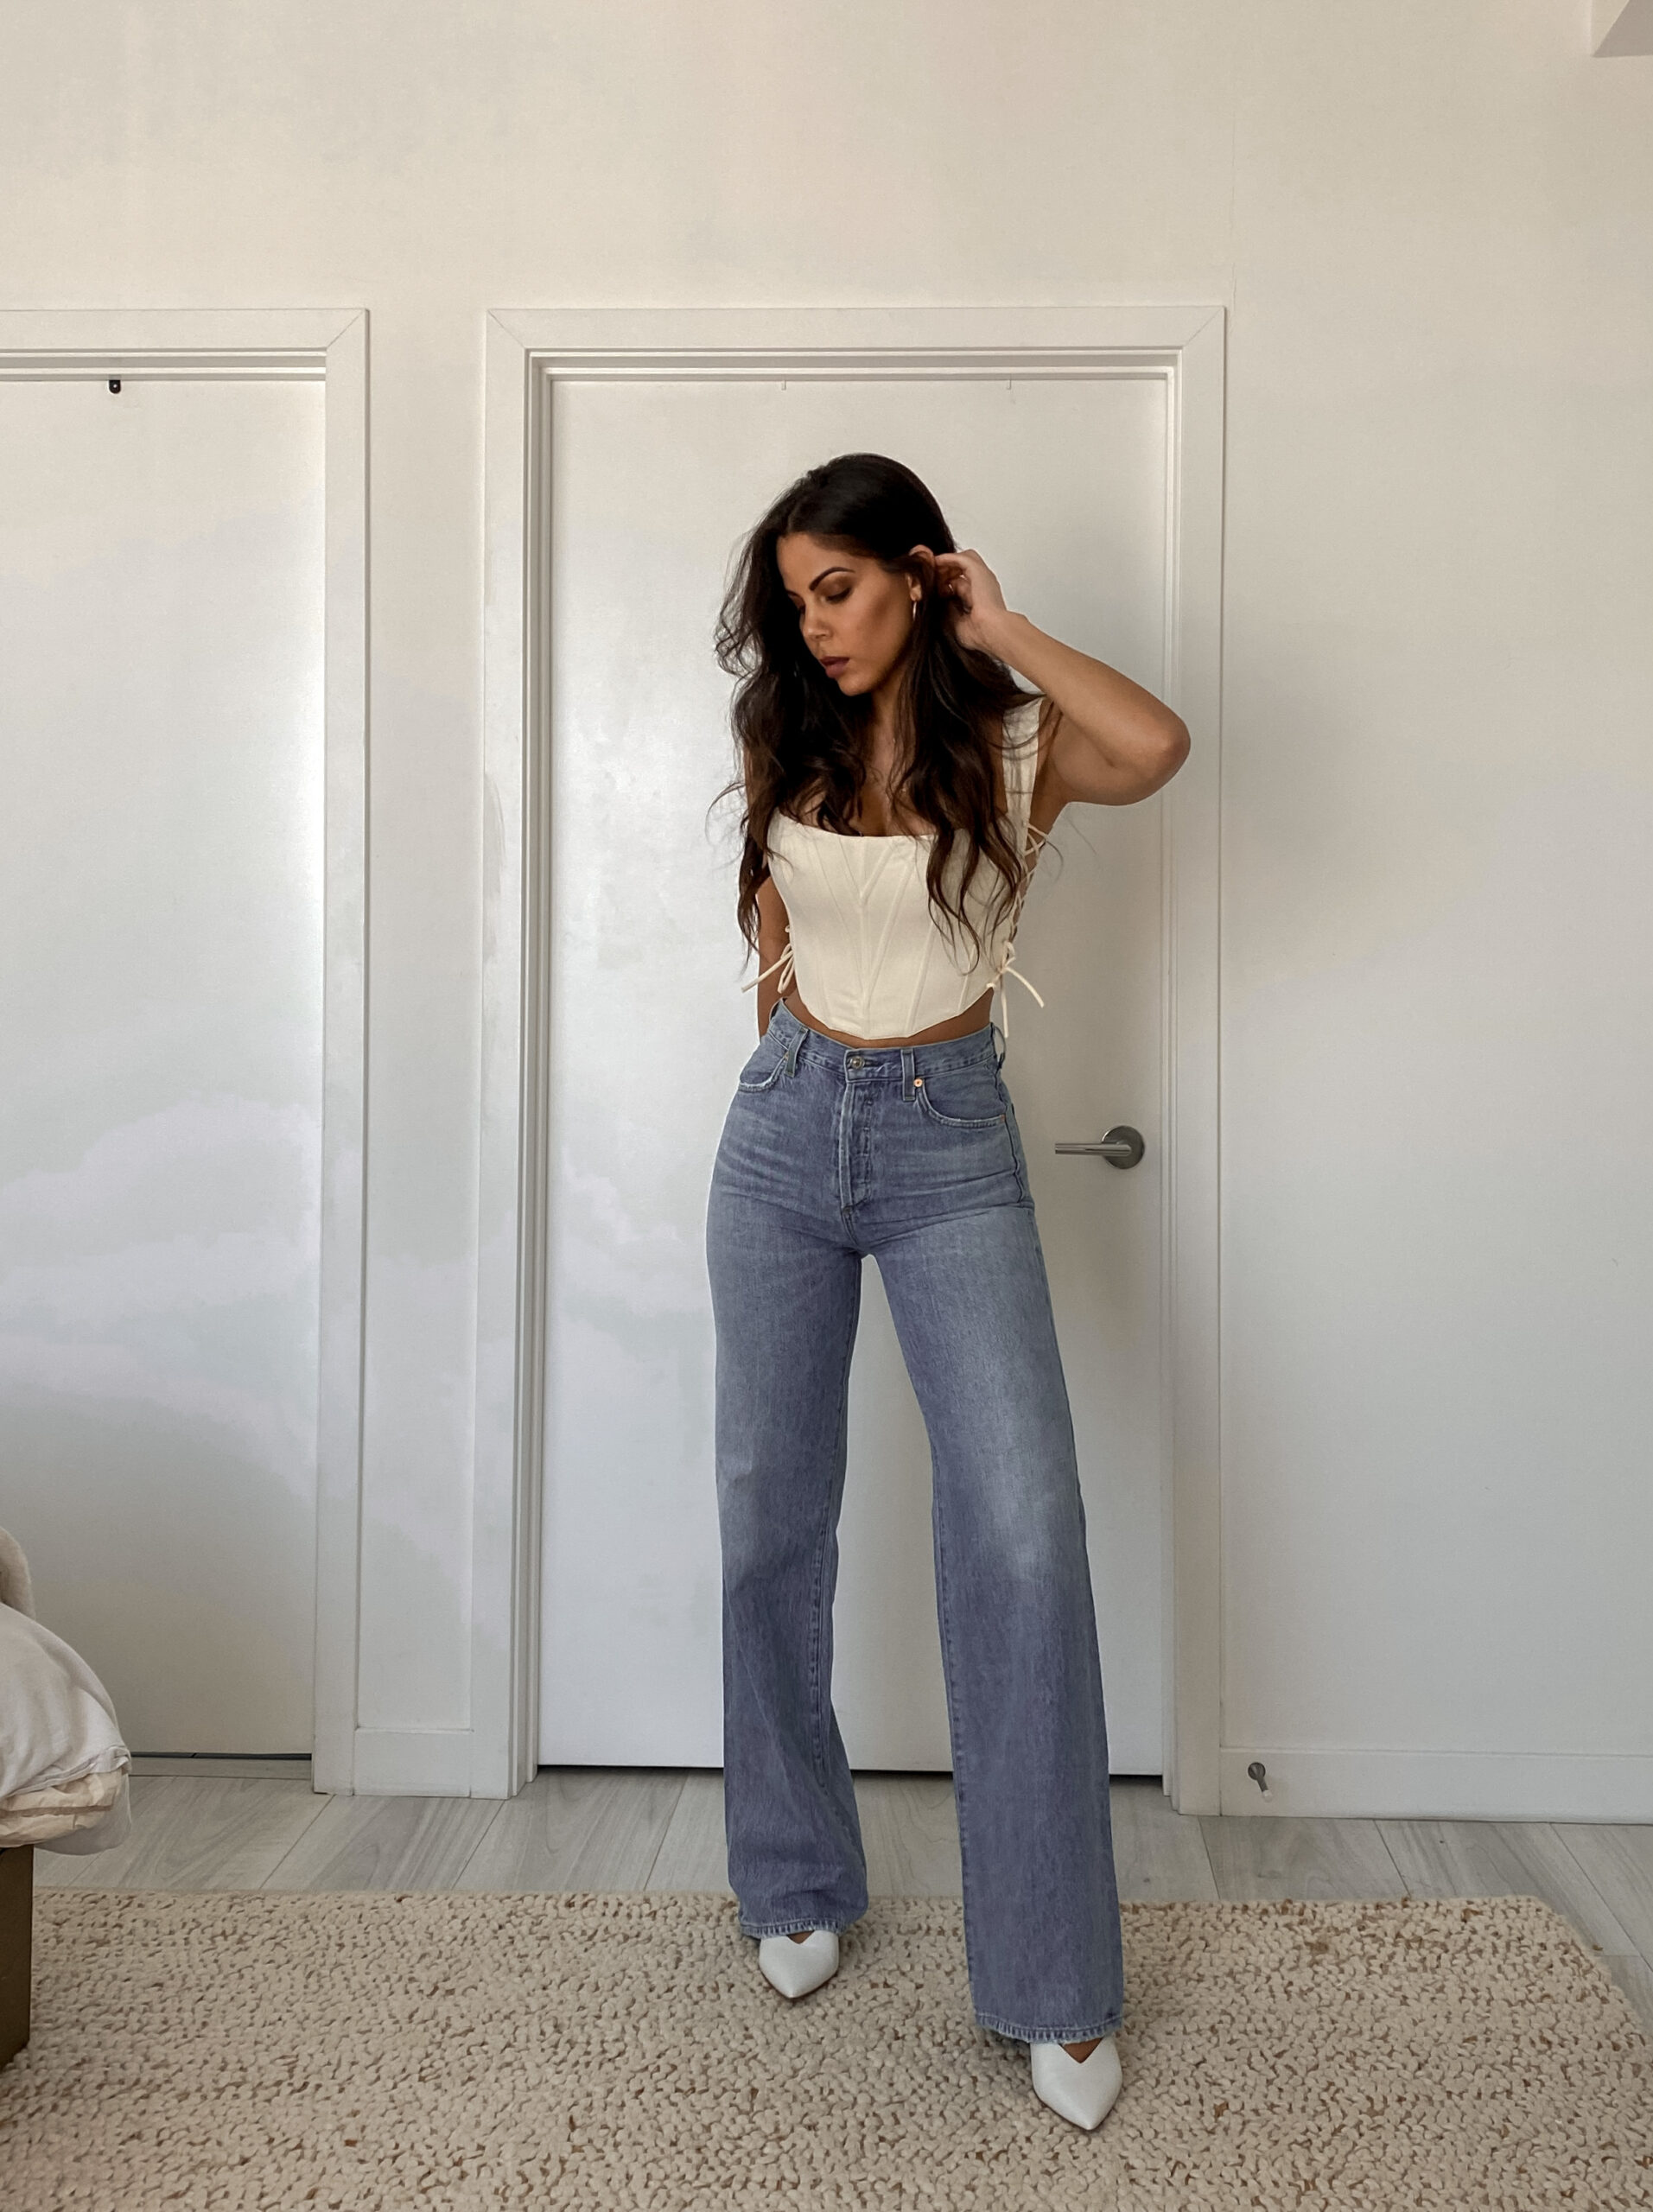 Corset Top And Jeans outfit